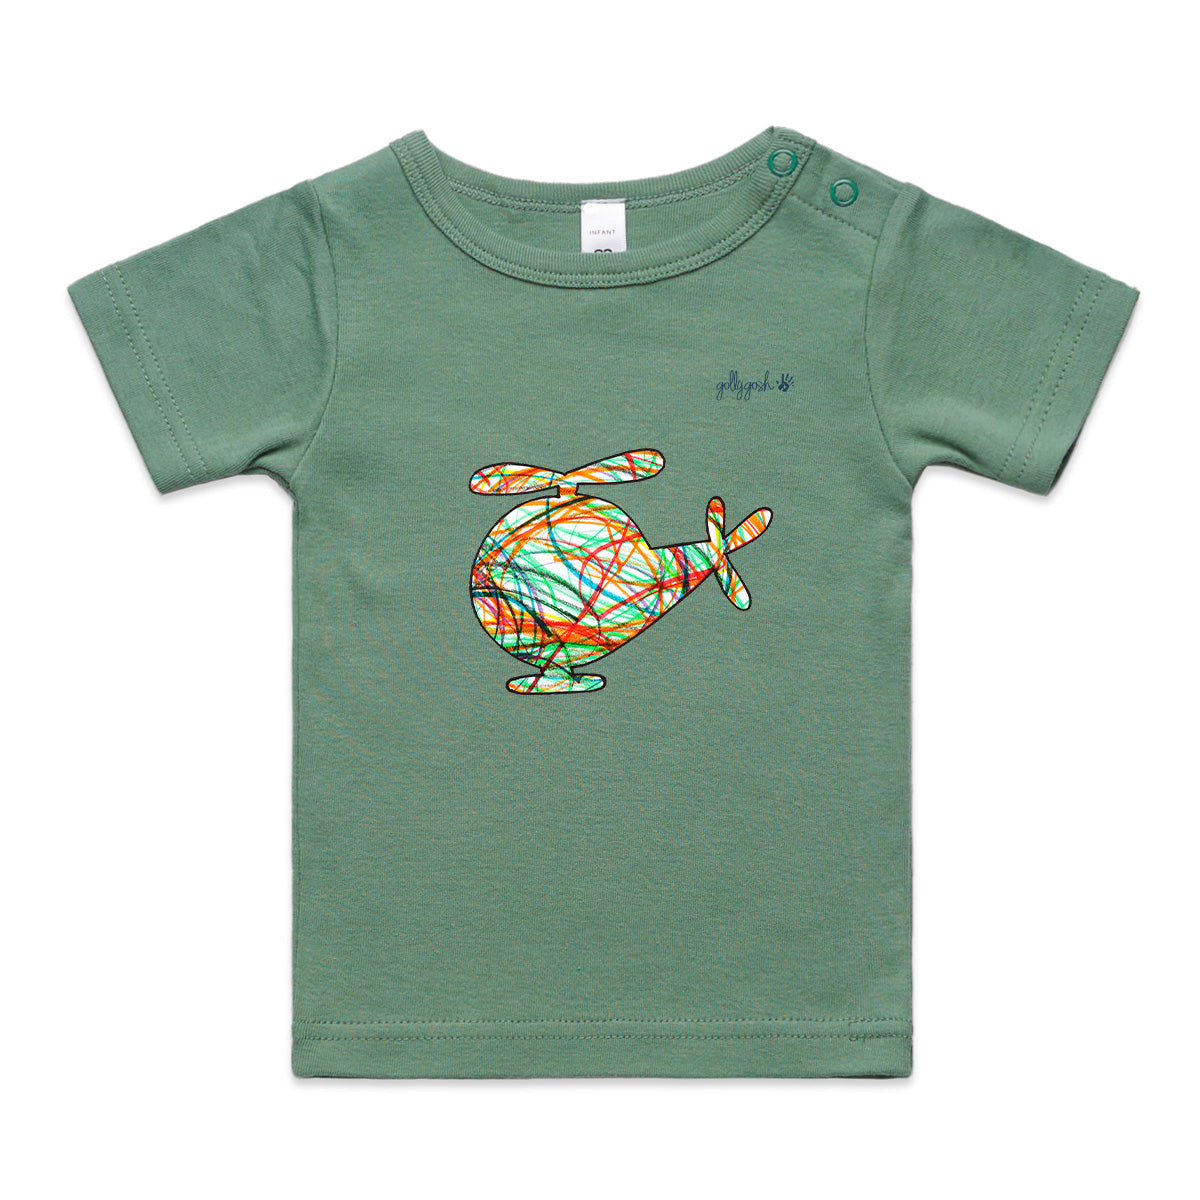 Helicopter - Infant Wee Tee